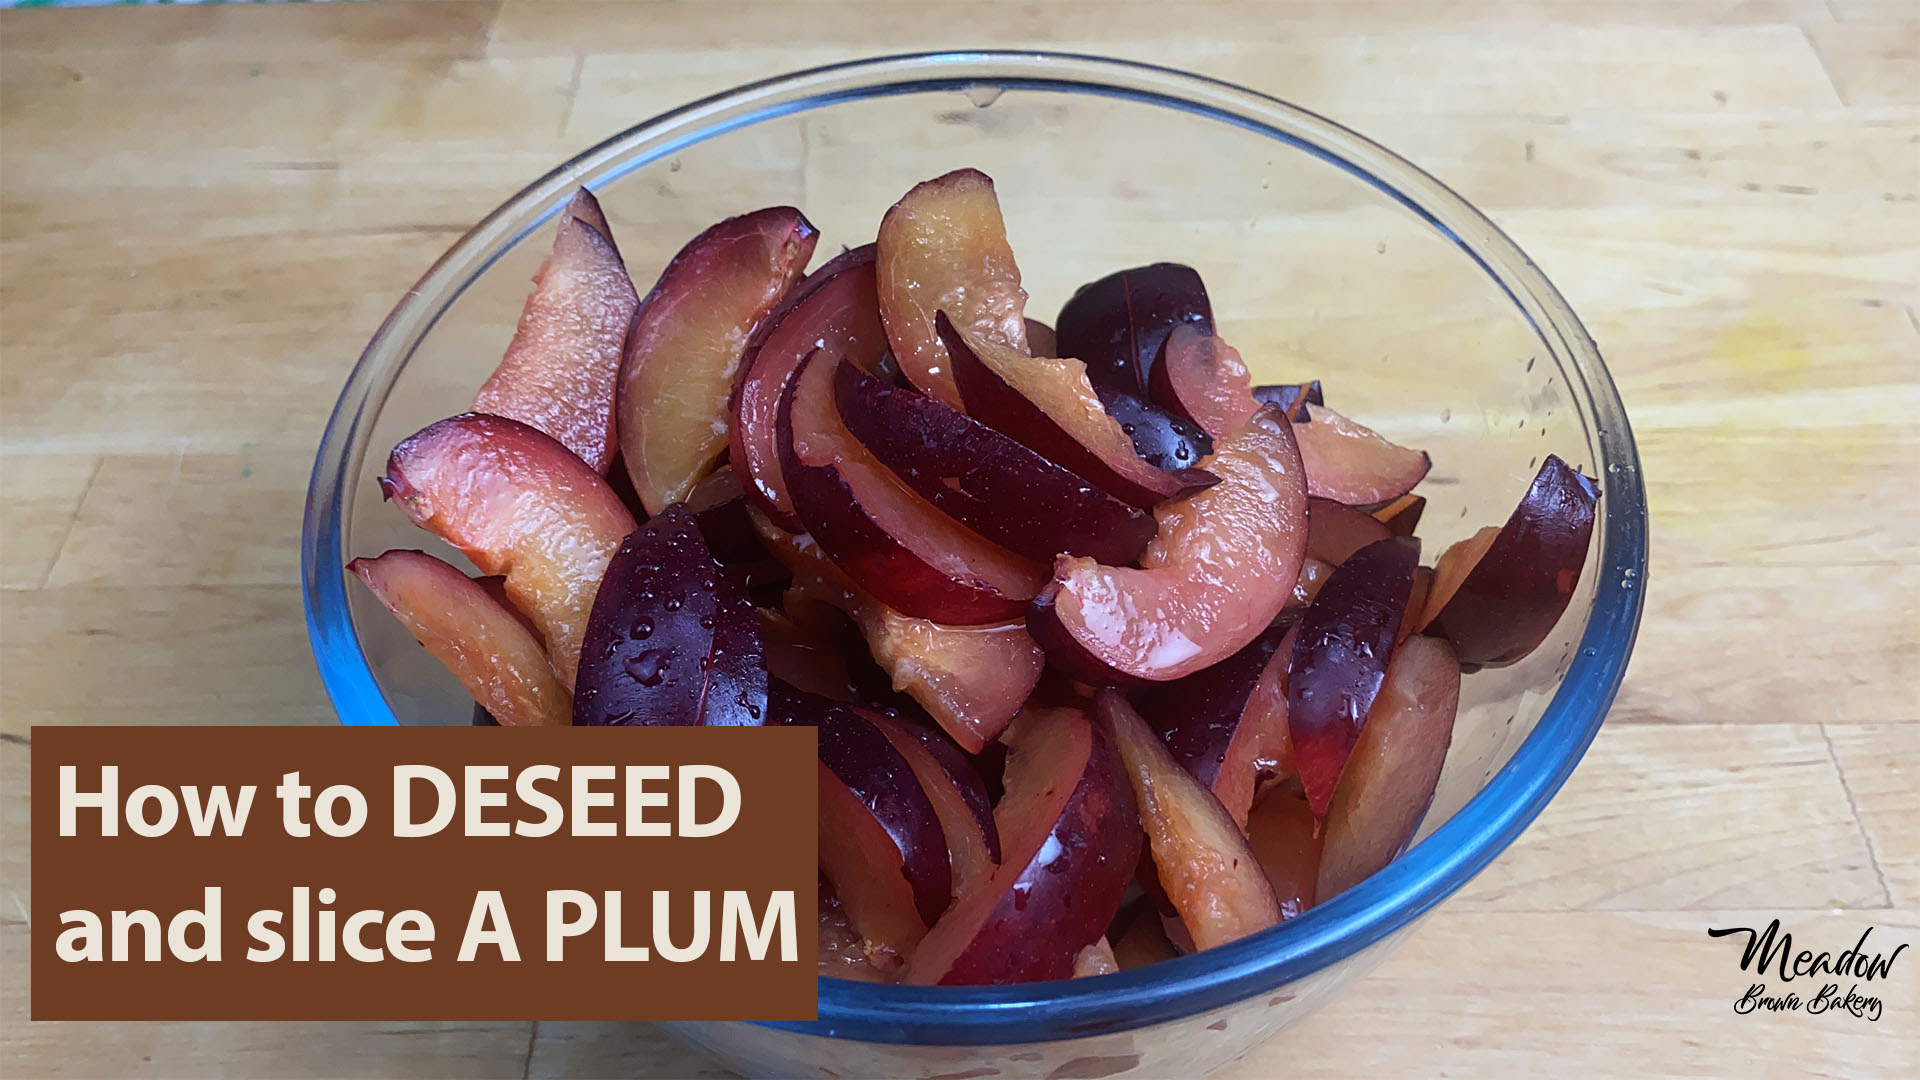 How to deseed a plum : How to pit plums for jam